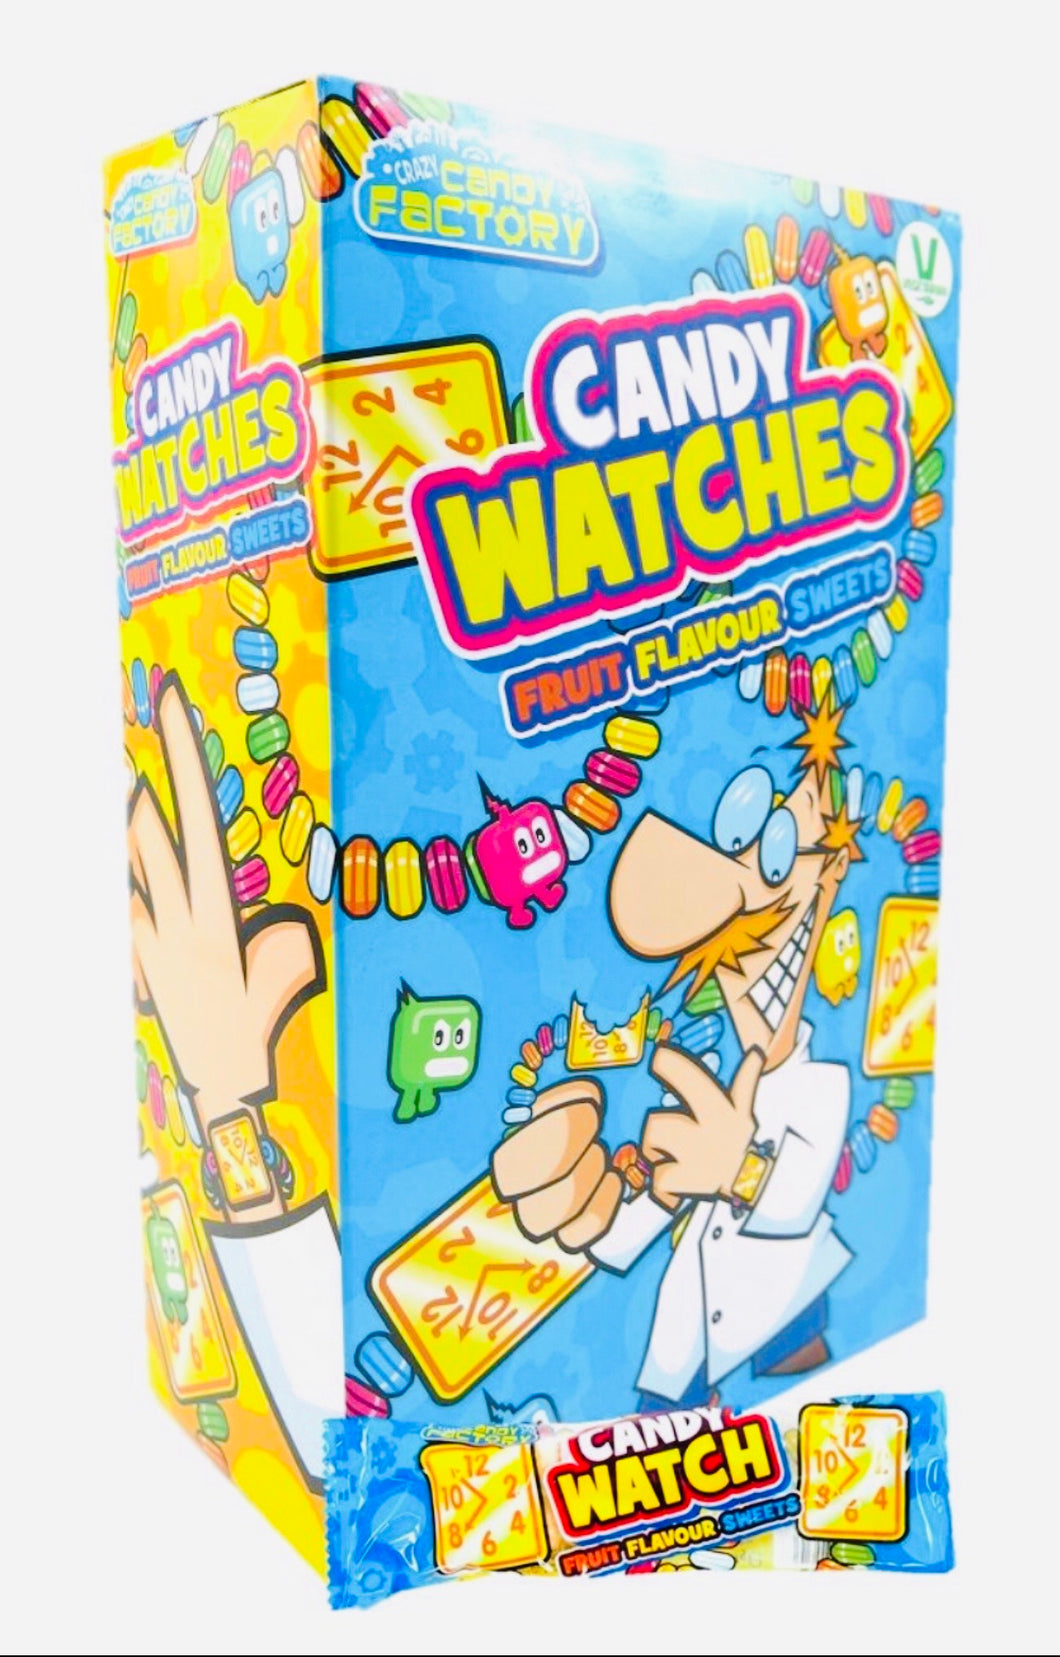 Crazy Candy Factory Candy Watches 17G